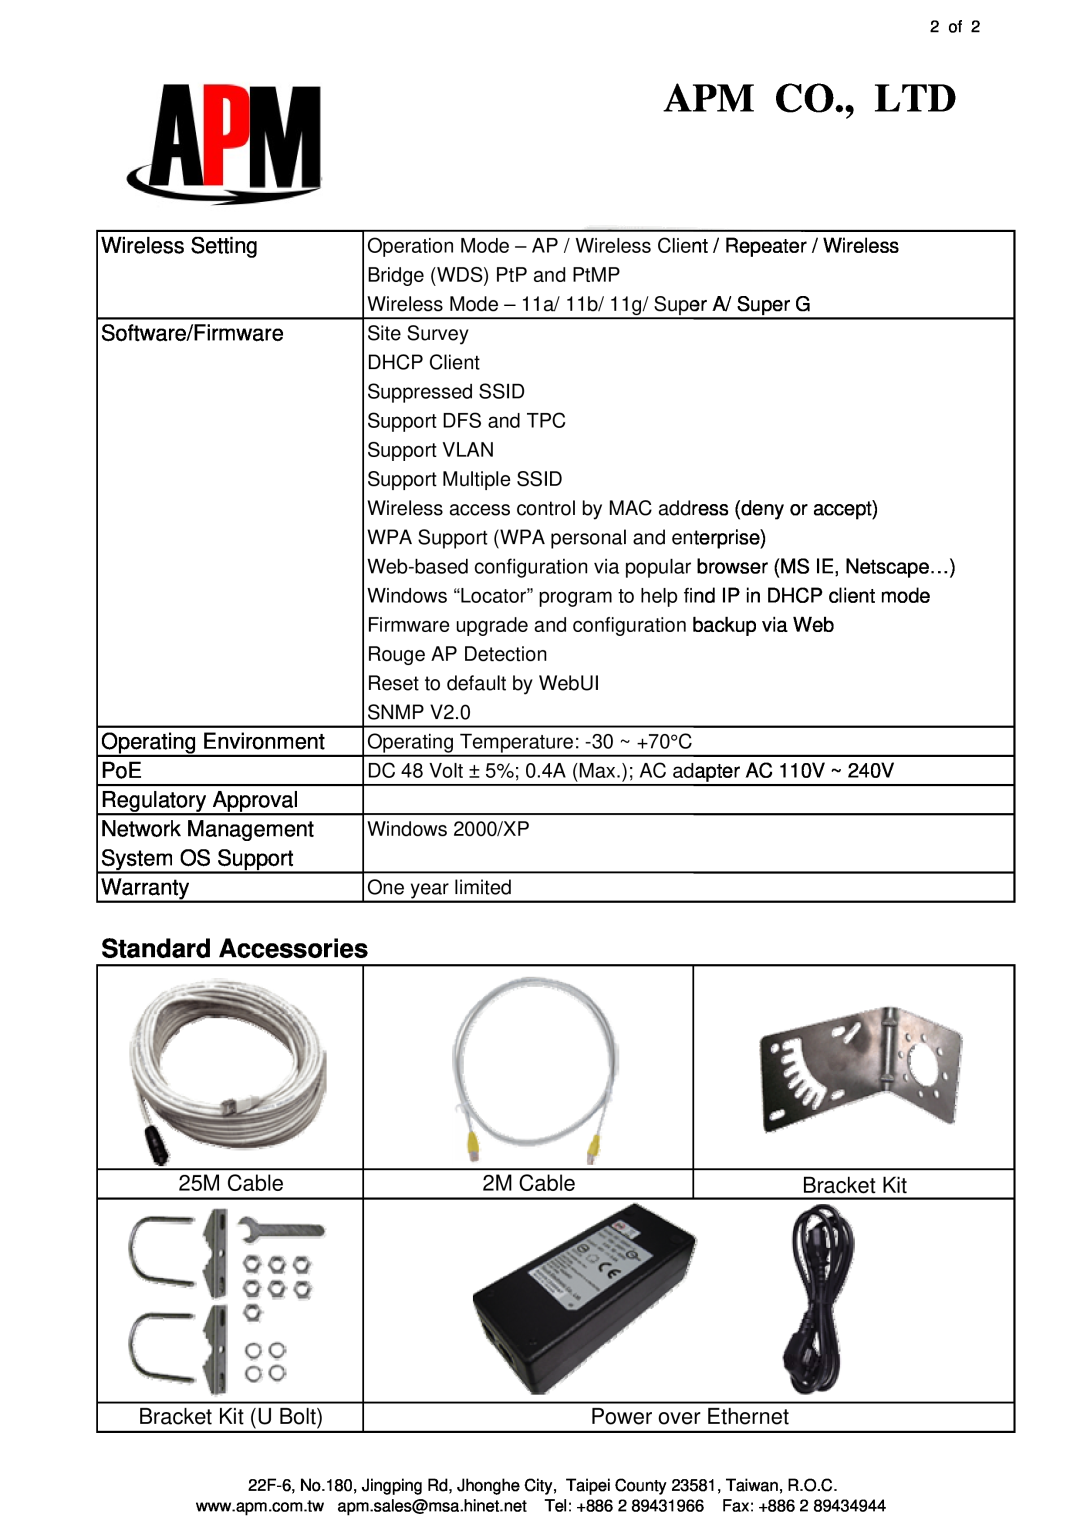 APM APE-502401abg specifications Standard Accessories 